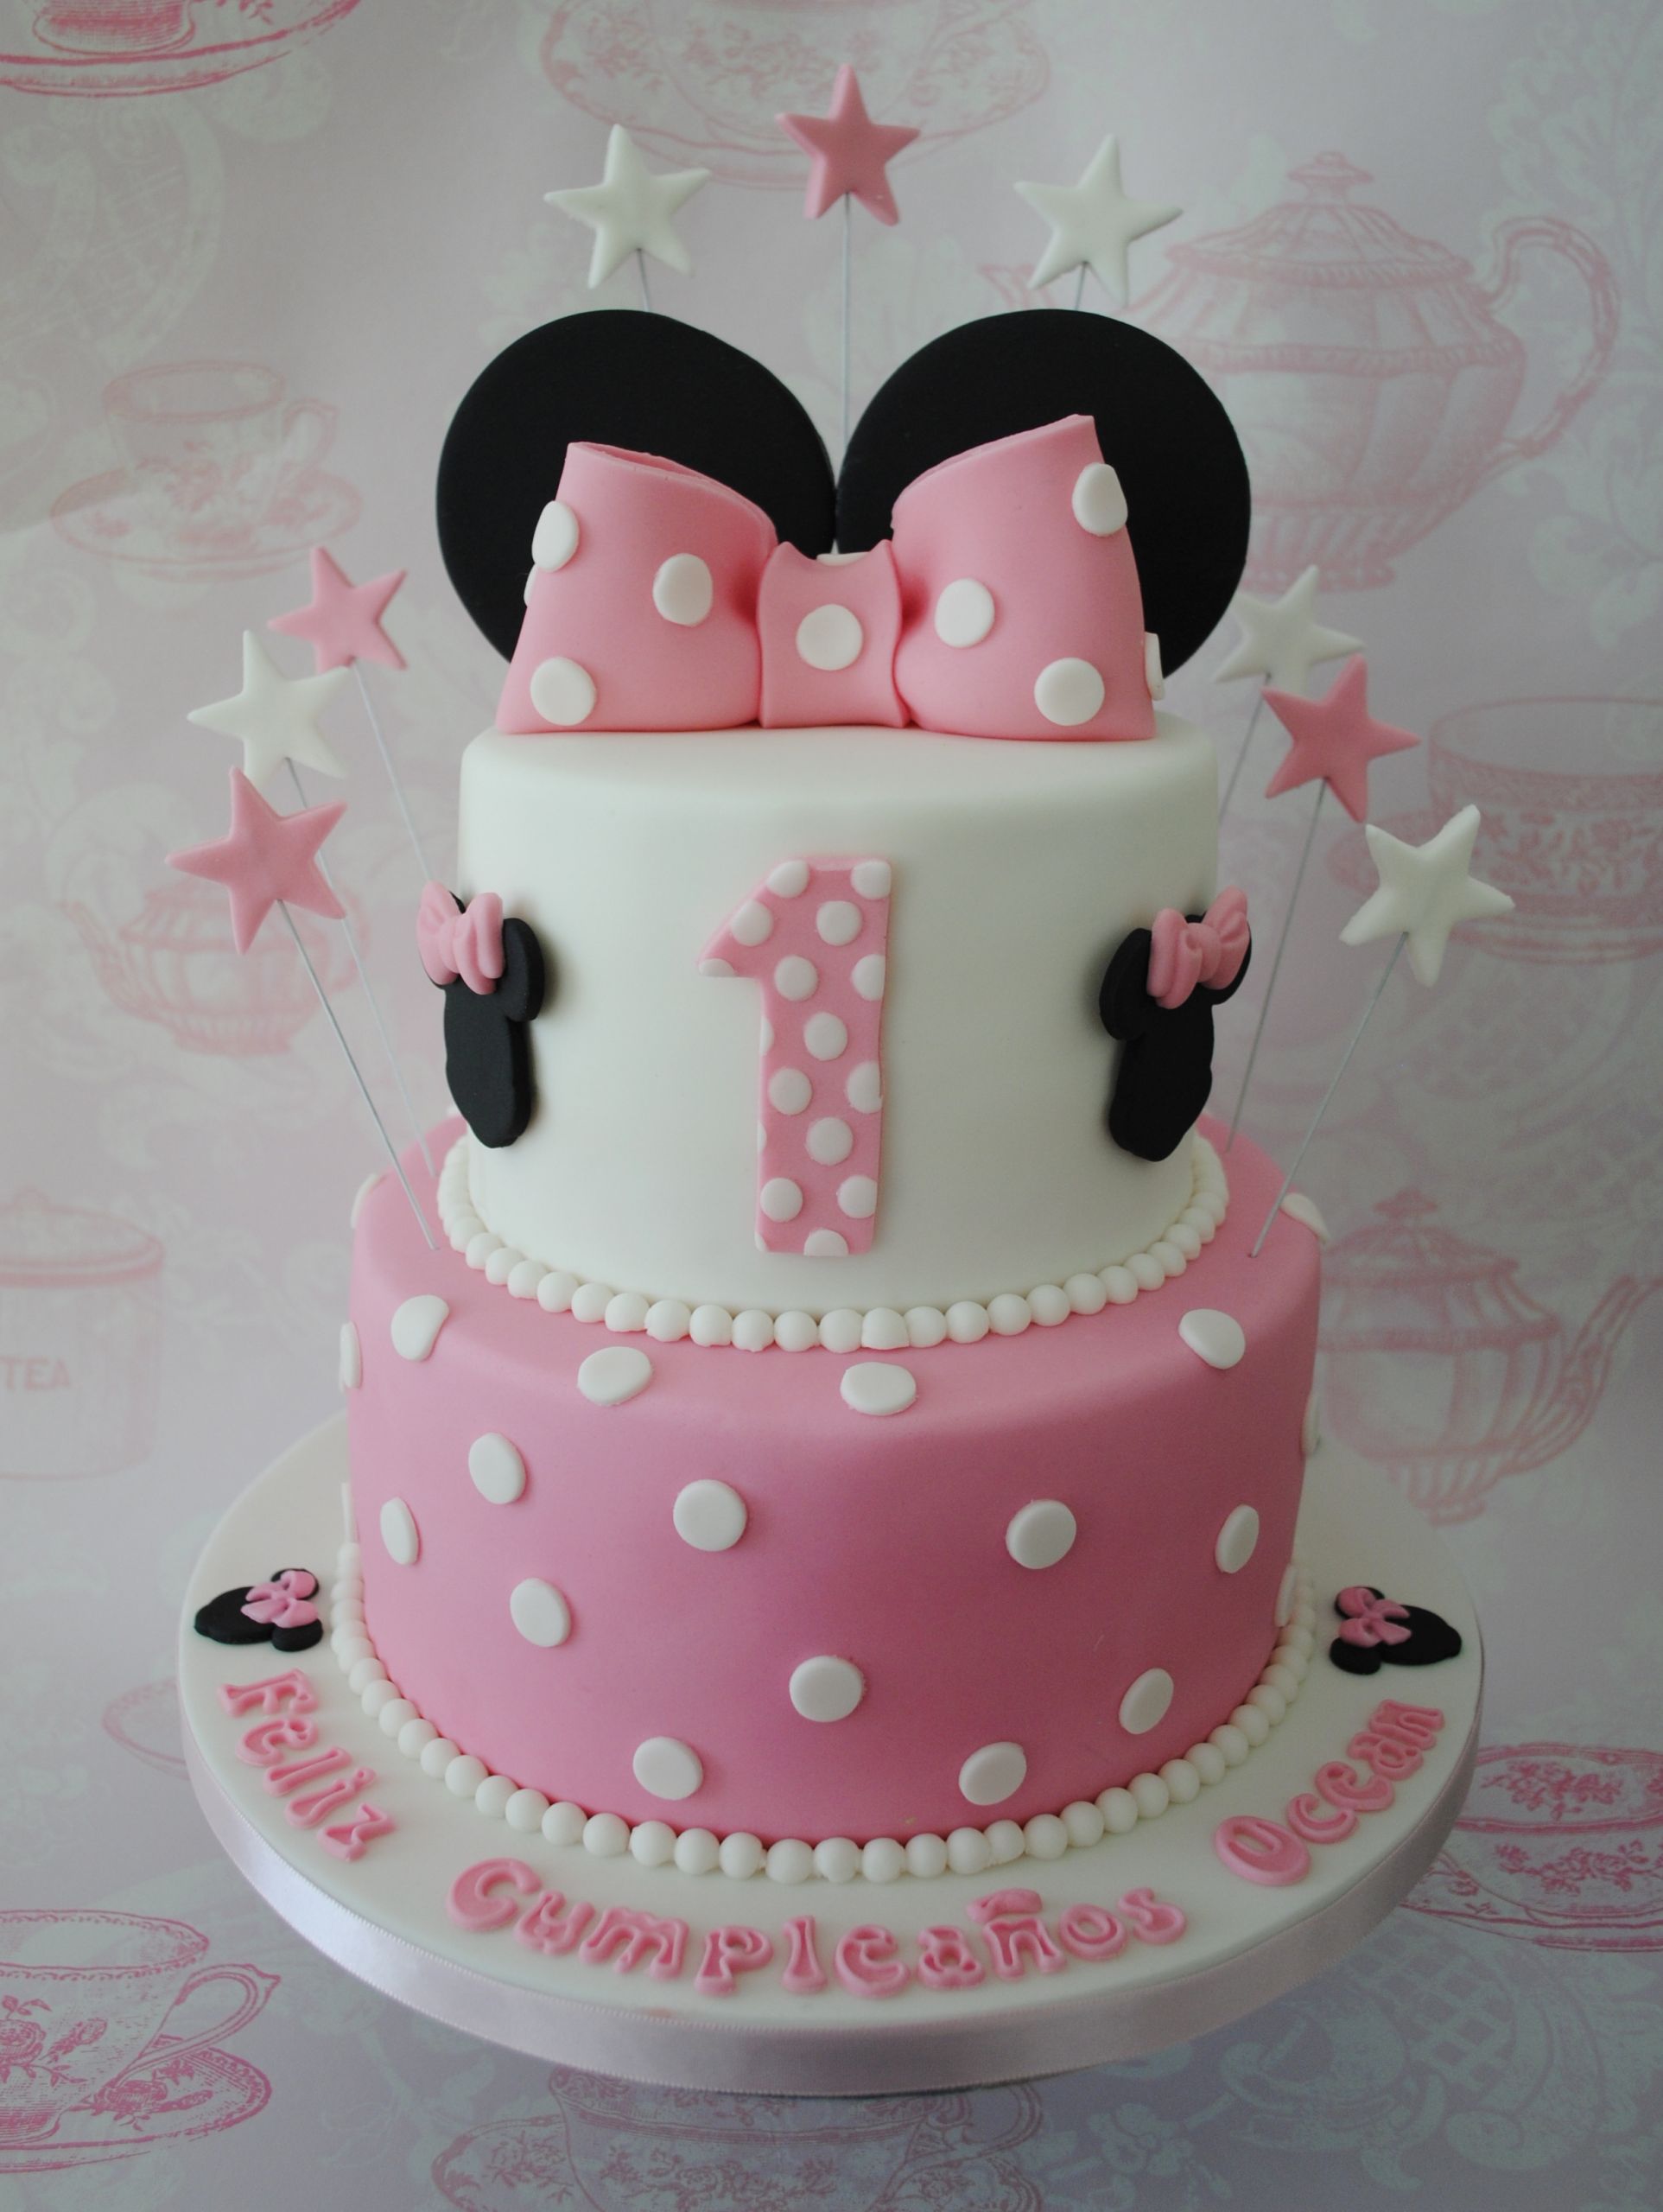 Minnie Mouse Birthday Cake
 Miss Cupcakes Blog Archive 2 tiered Minnie mouse